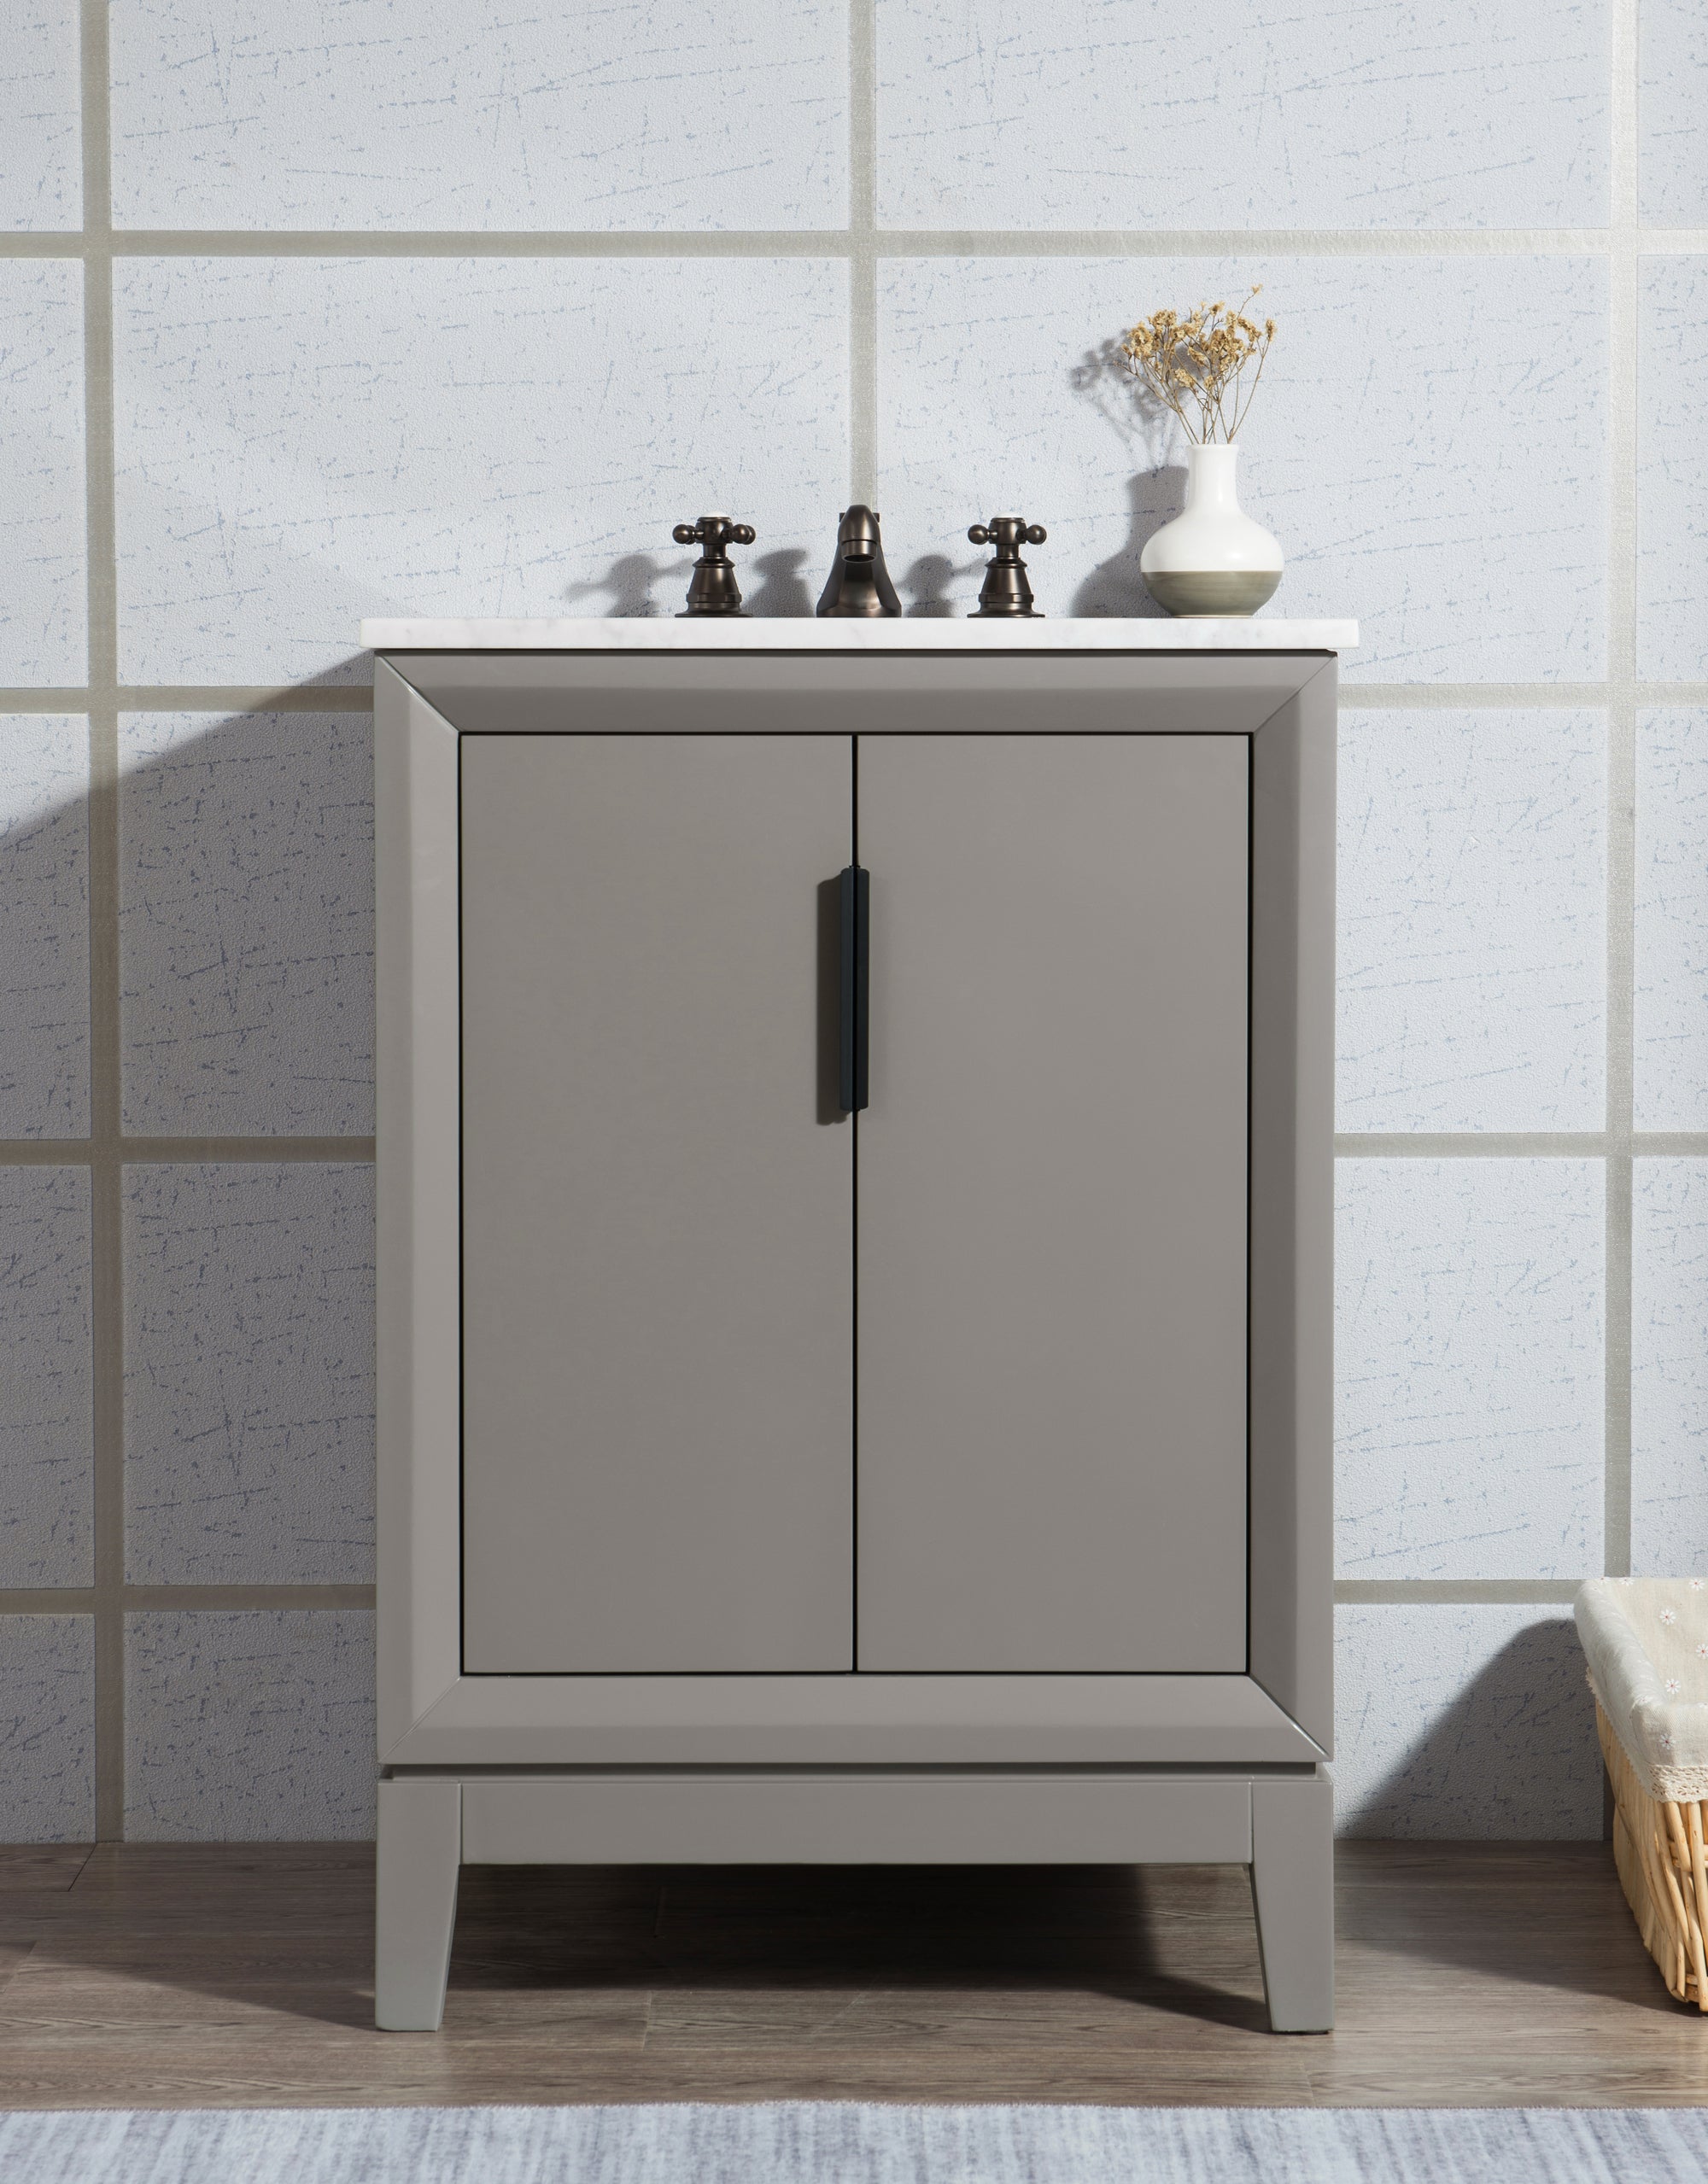 Water Creation | Elizabeth 24-Inch Single Sink Carrara White Marble Vanity In Cashmere Grey With Matching Mirror(s) | EL24CW03CG-R21000000